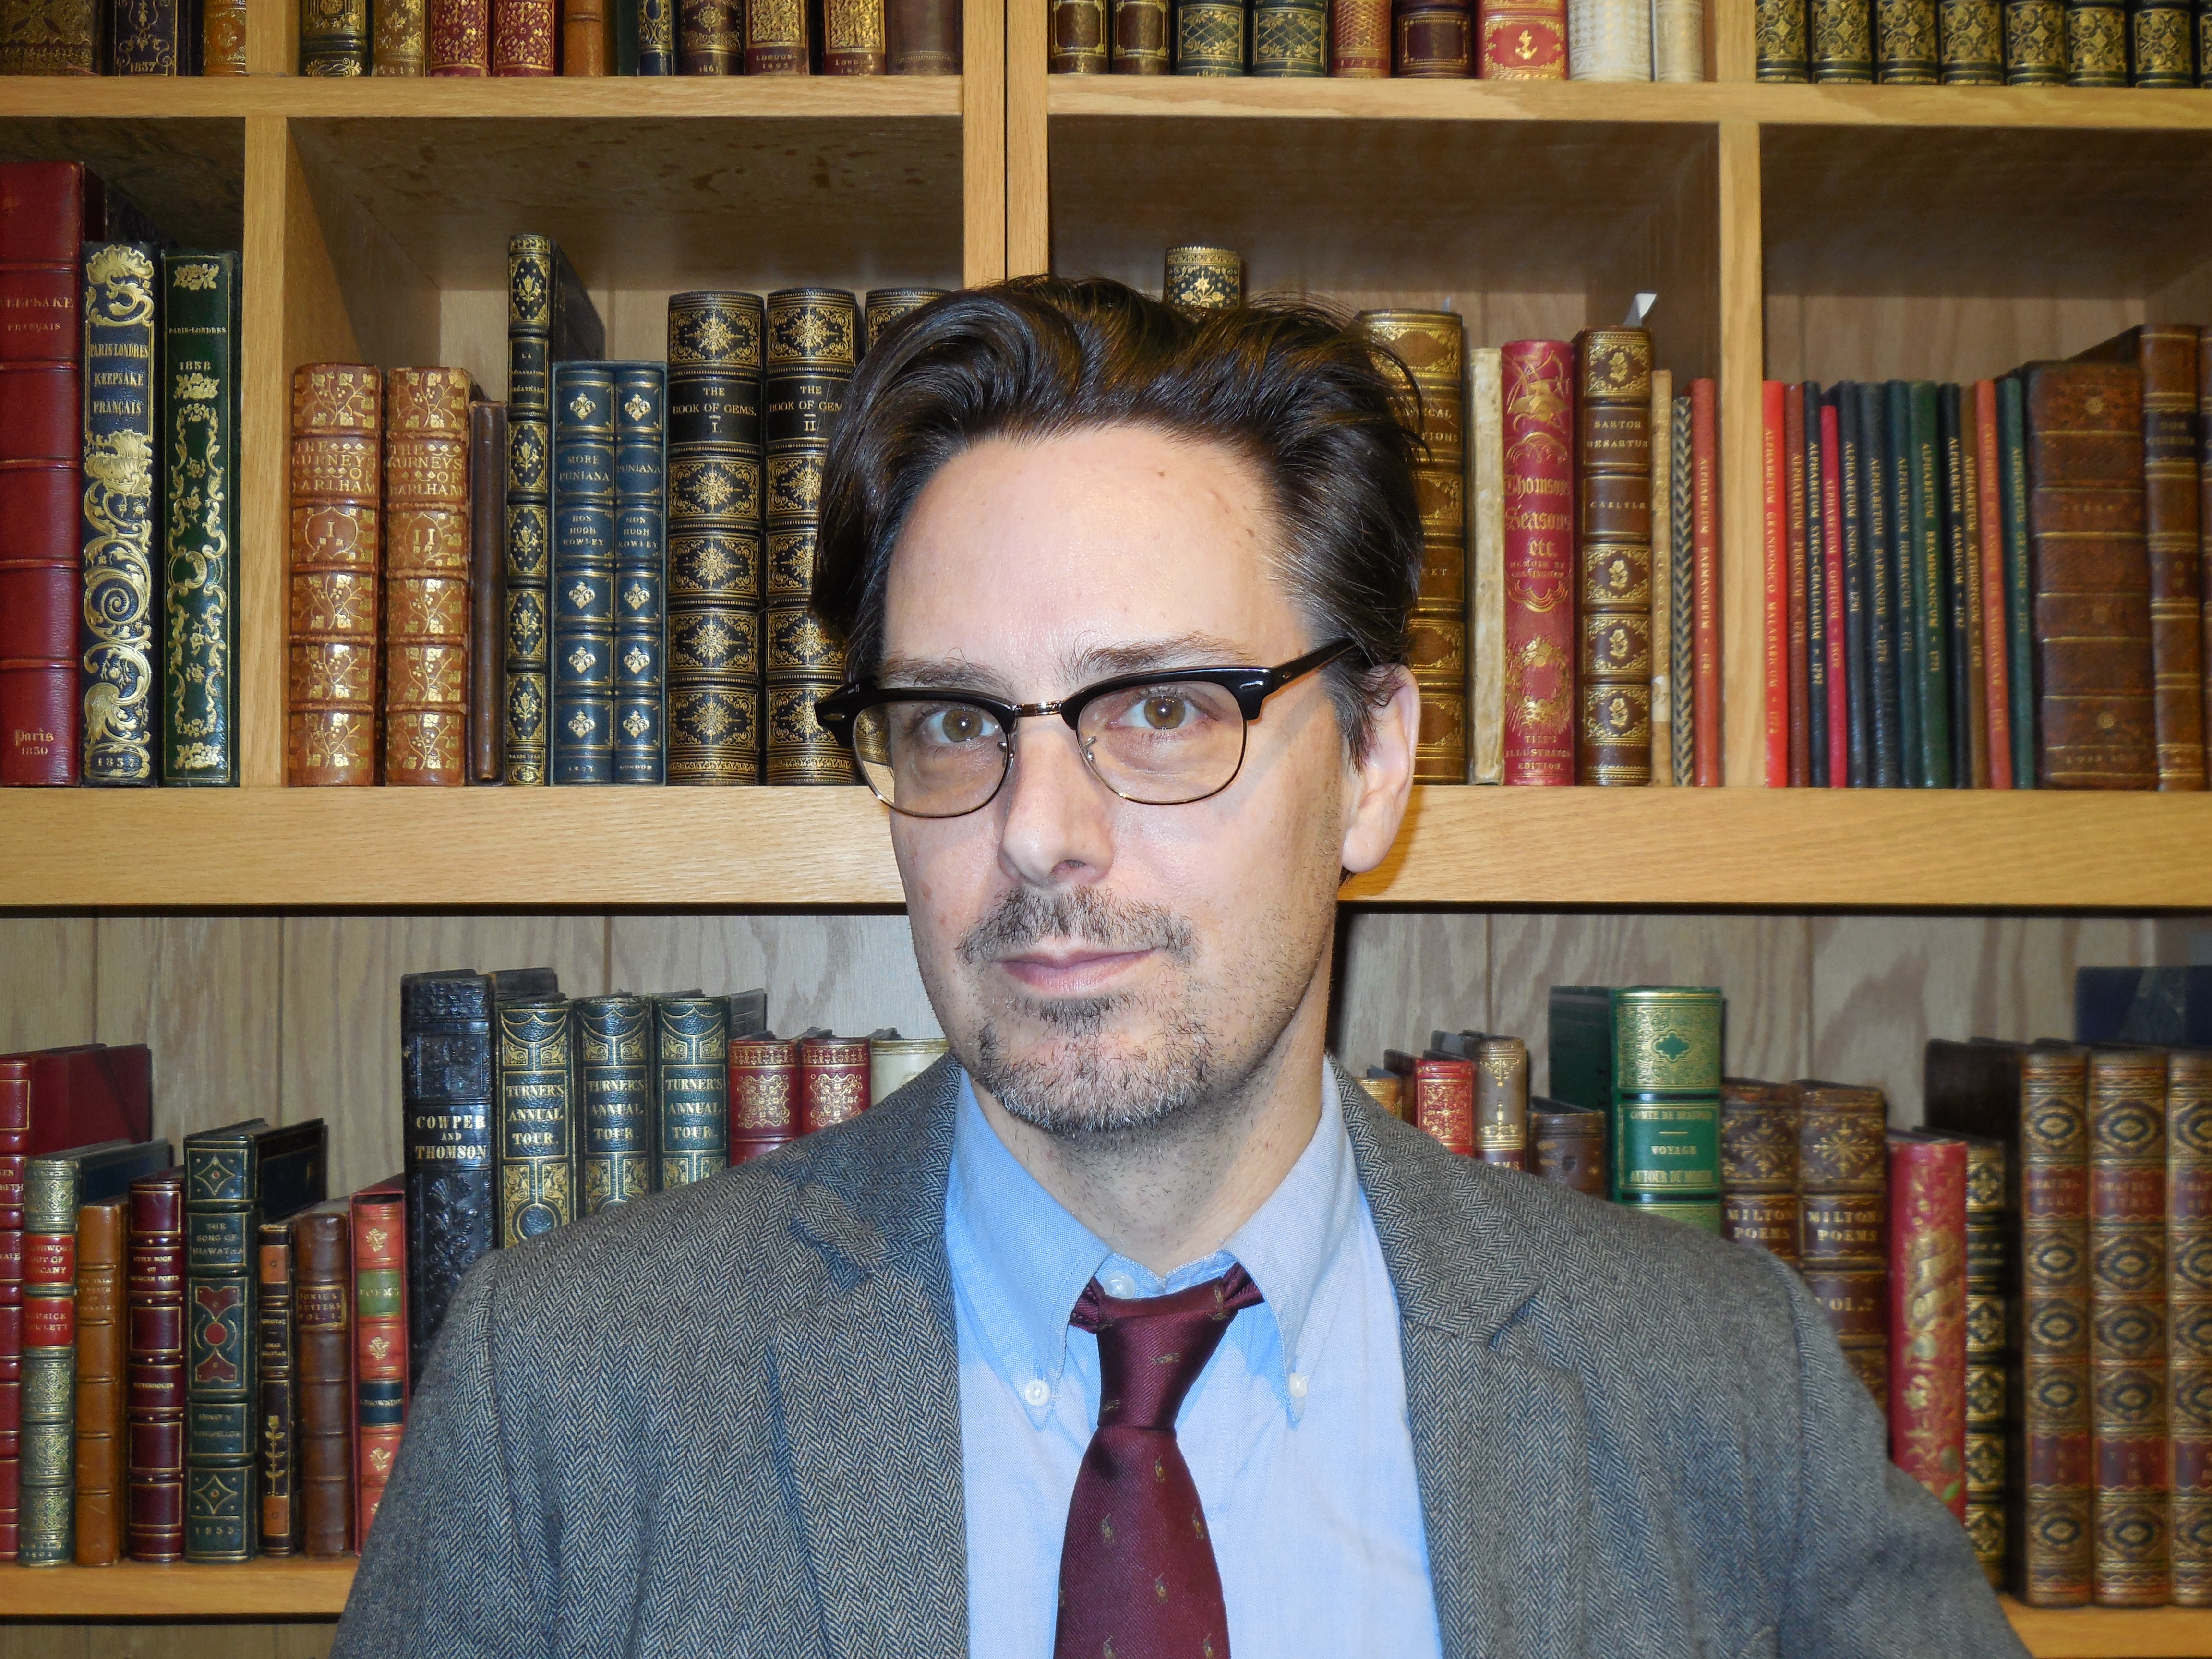 Gerald W. Cloud named as Carl and Lily Pforzheimer Curator of Early Books and Manuscripts